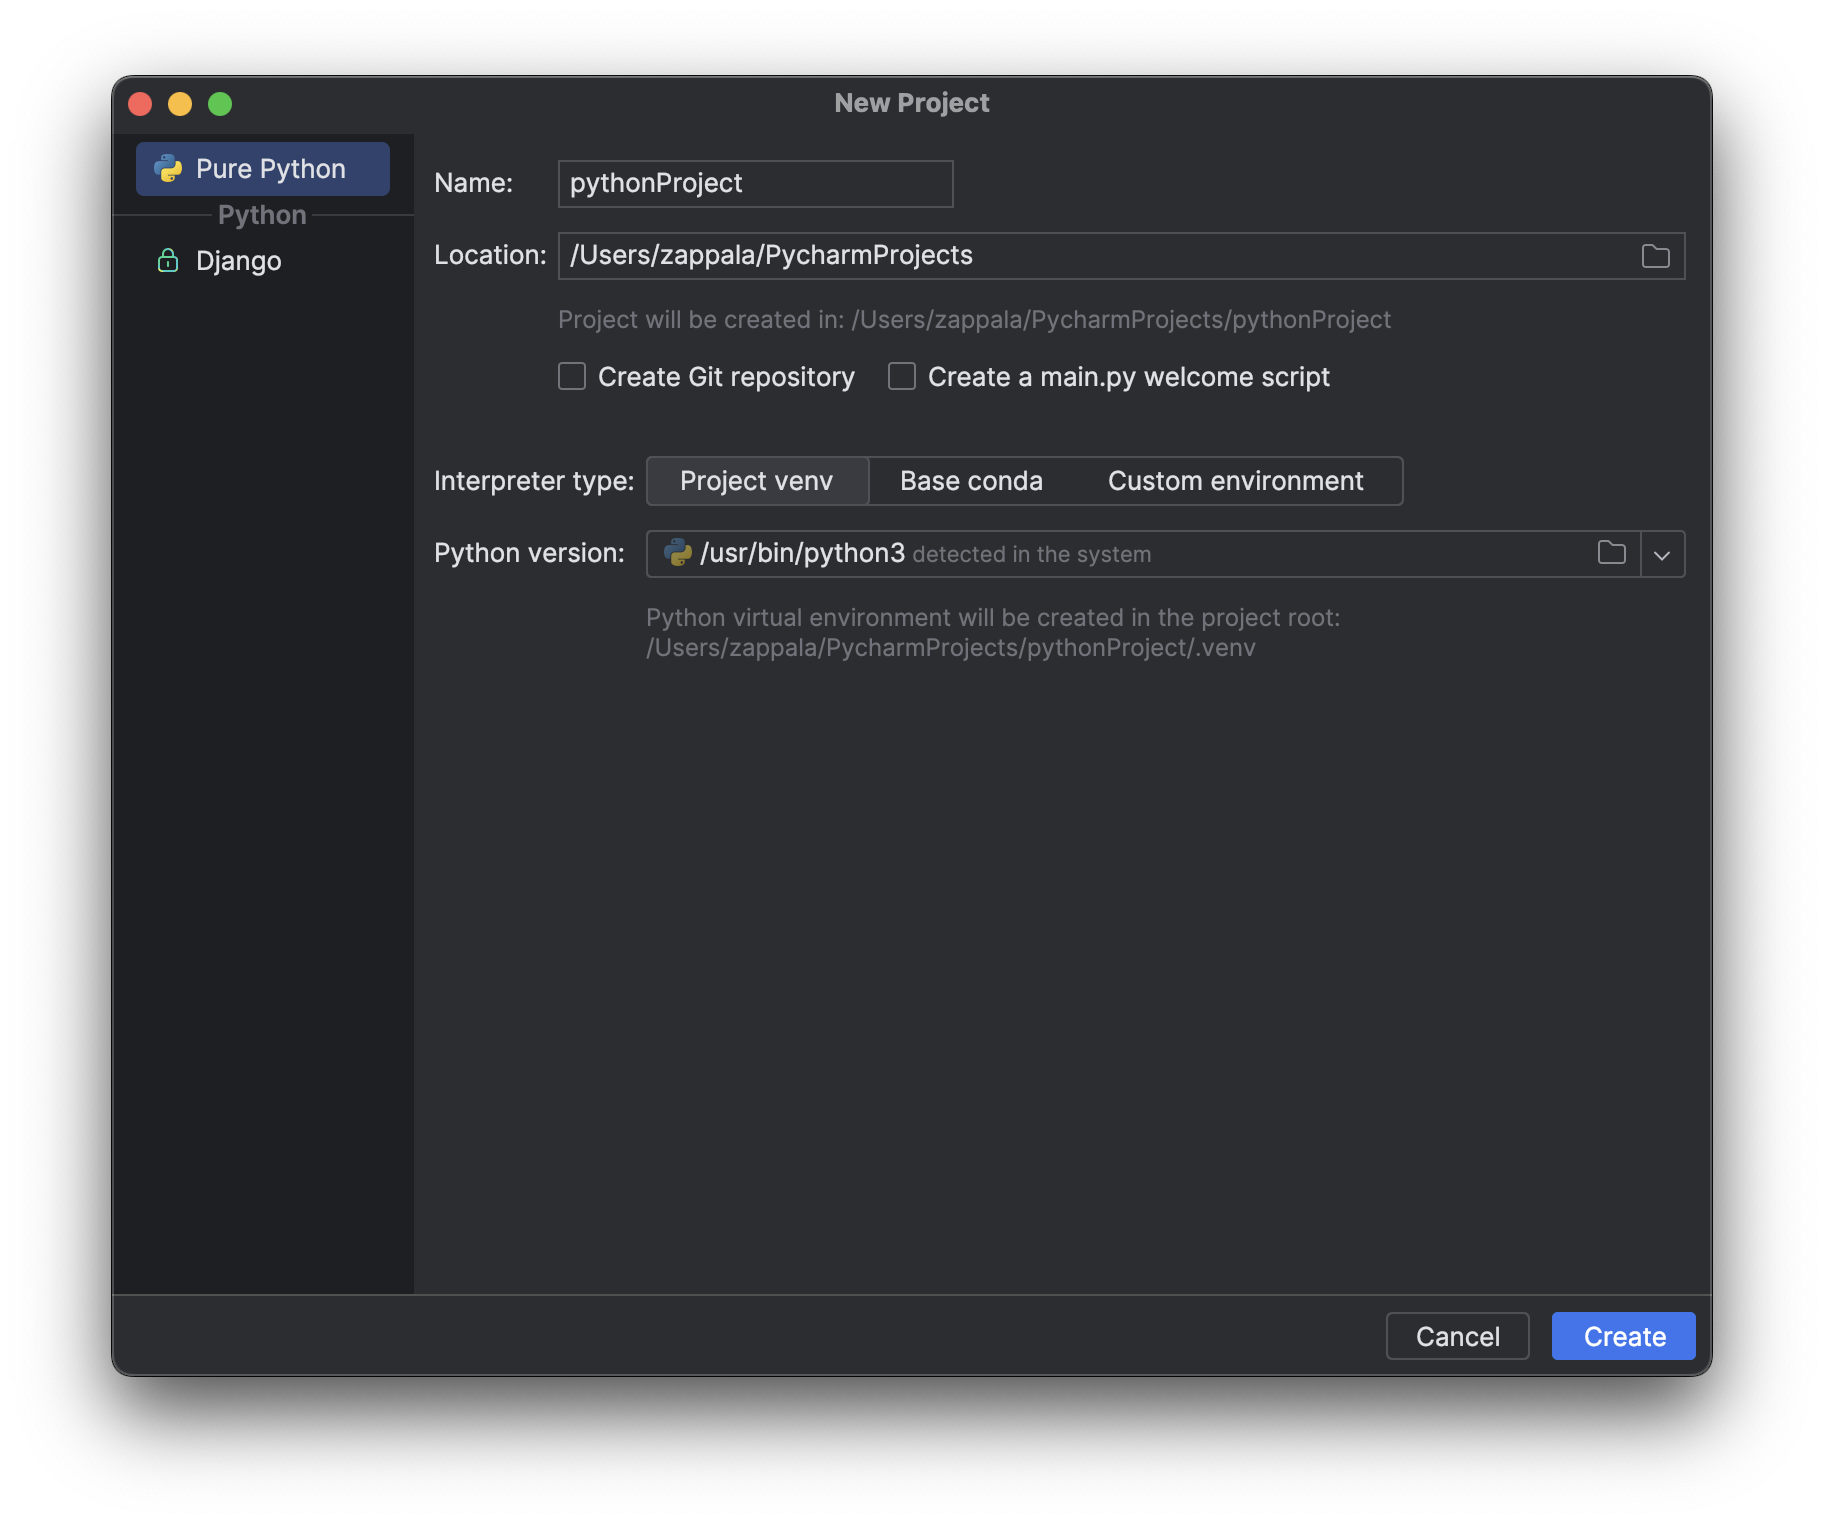 PyCharm new project screen